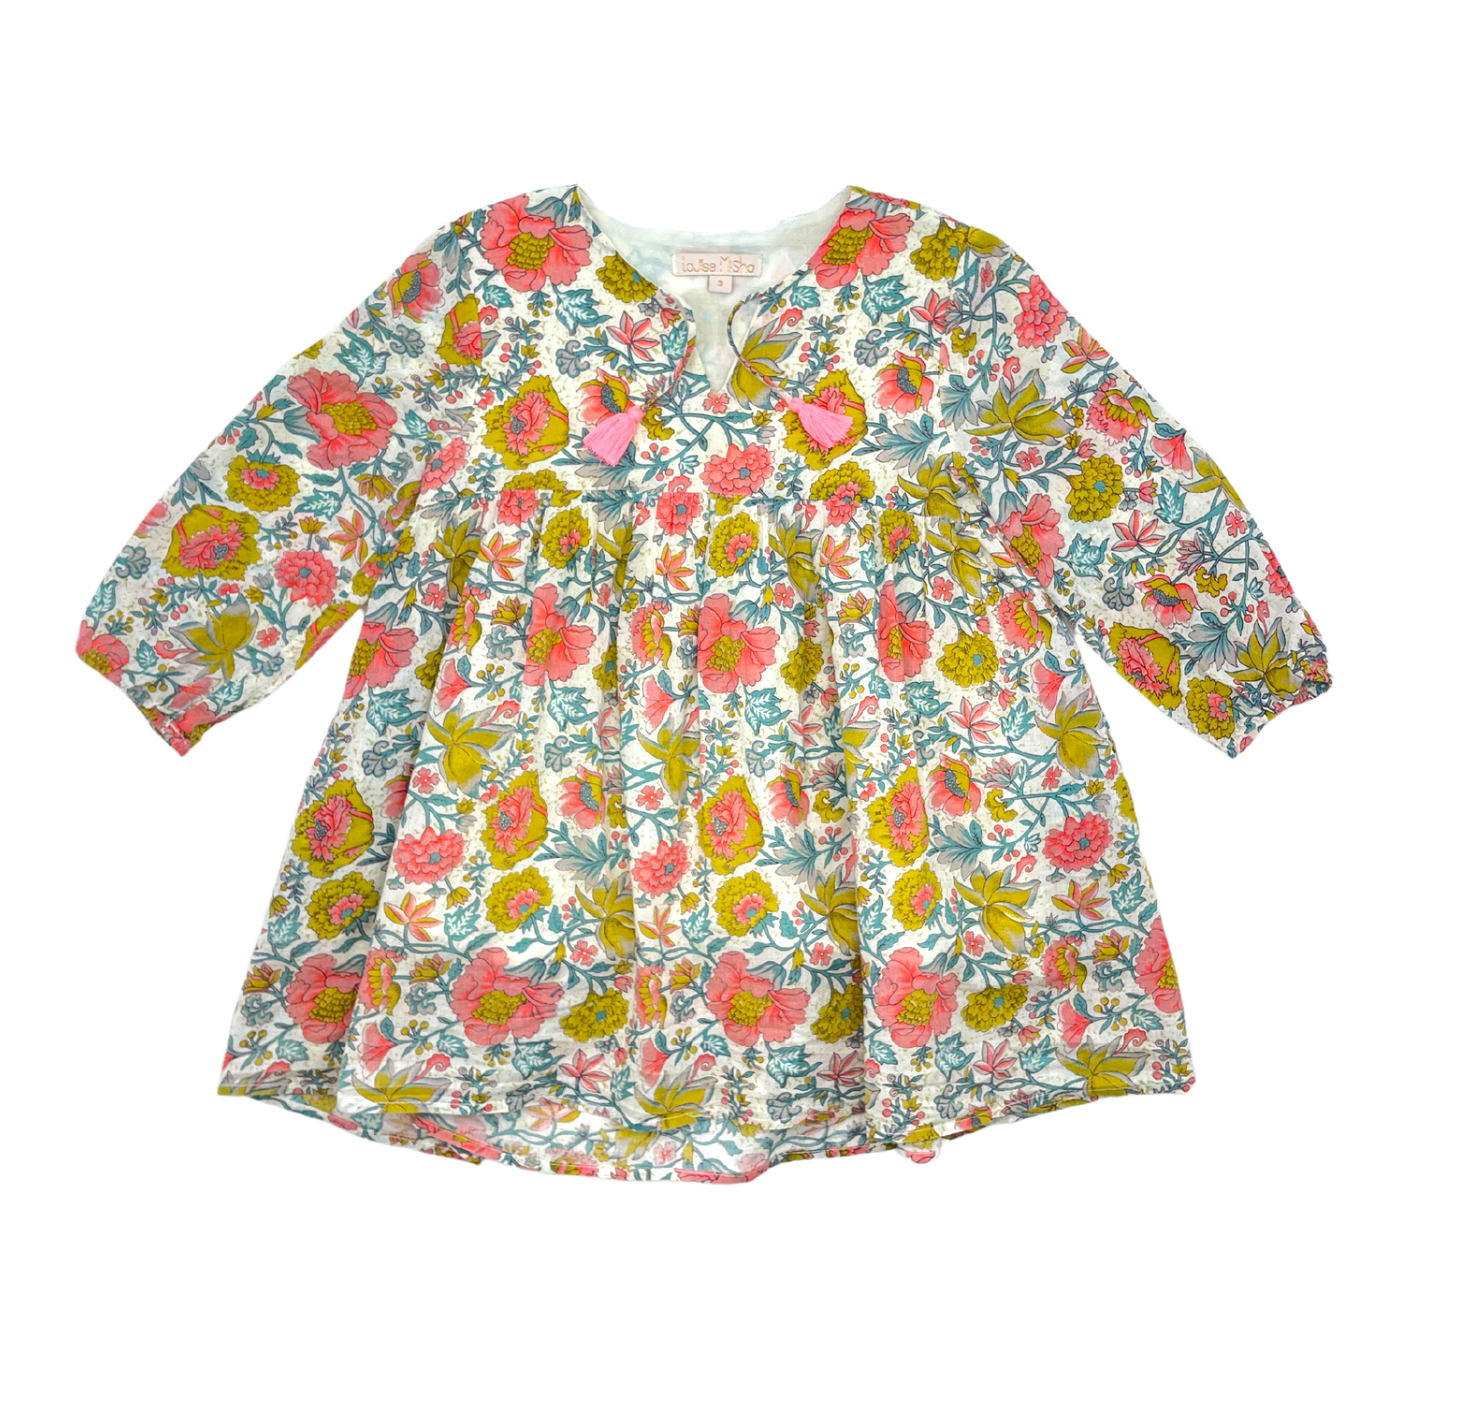 LOUISE MISHA - Floral dress with pompoms - 3 years old